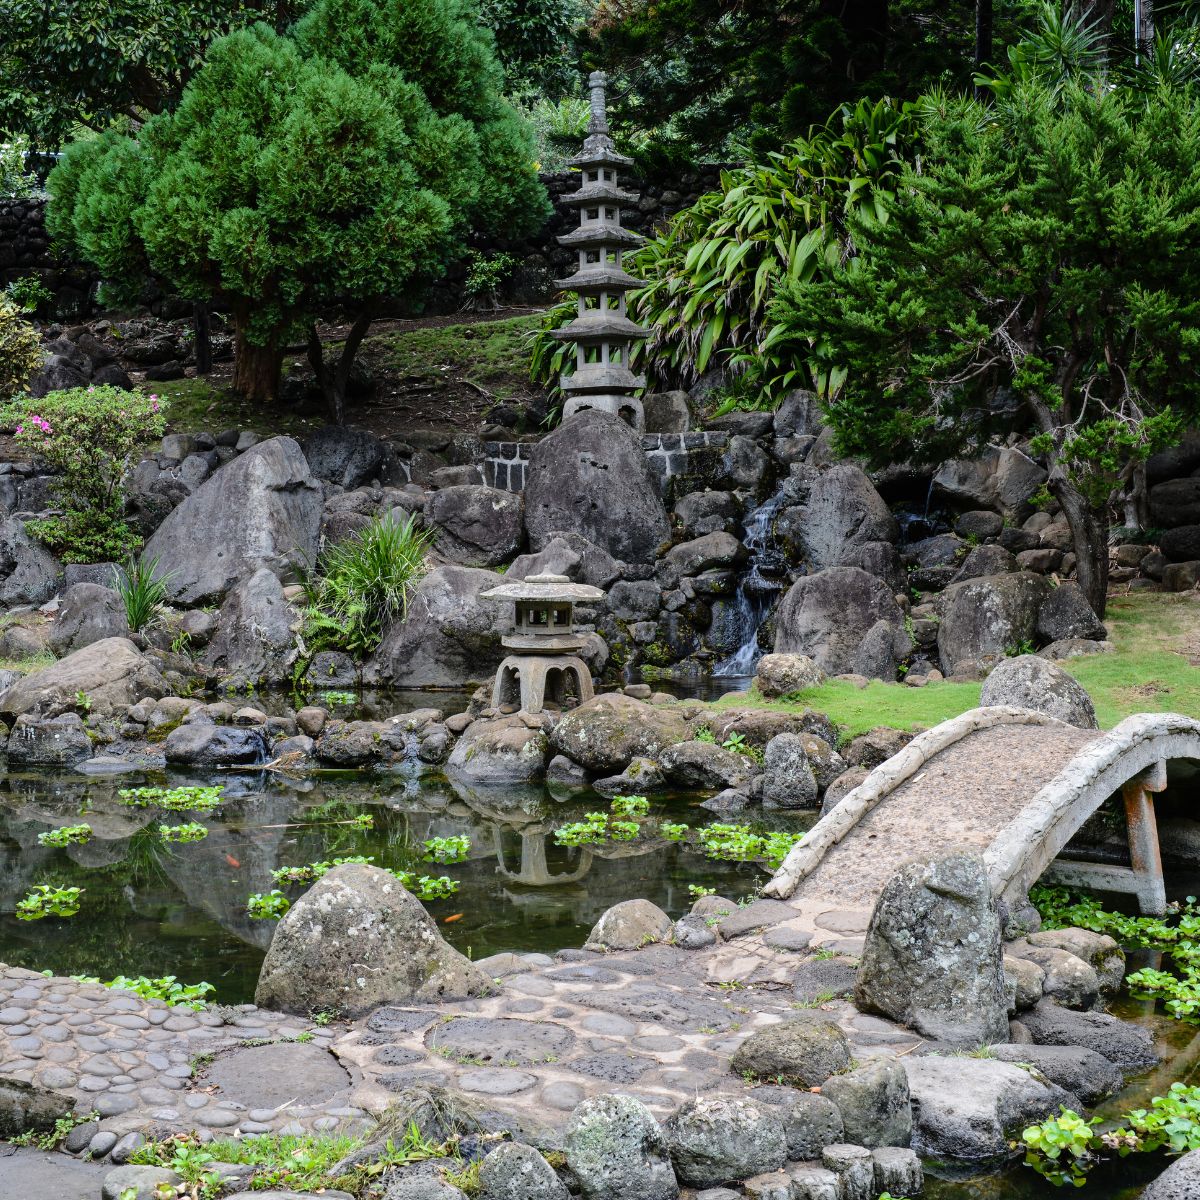 Asian style garden with lots of rocks, a pond and a stone bridge.  